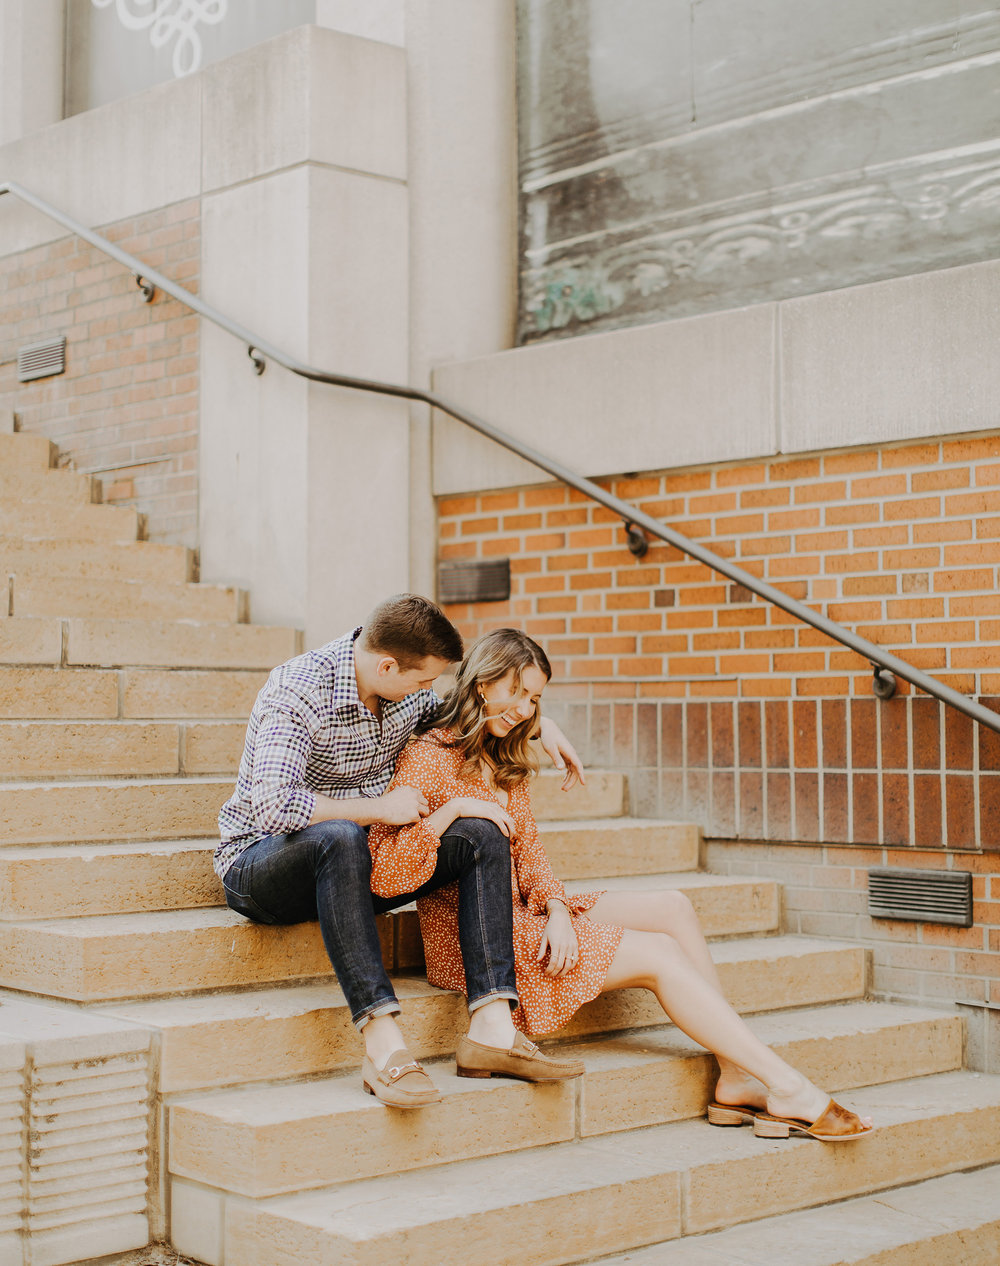 Wesley Goforth &amp; Jaclyn Sheets's Kansas City Engagement Portraits by the Waldron Photograph Company.